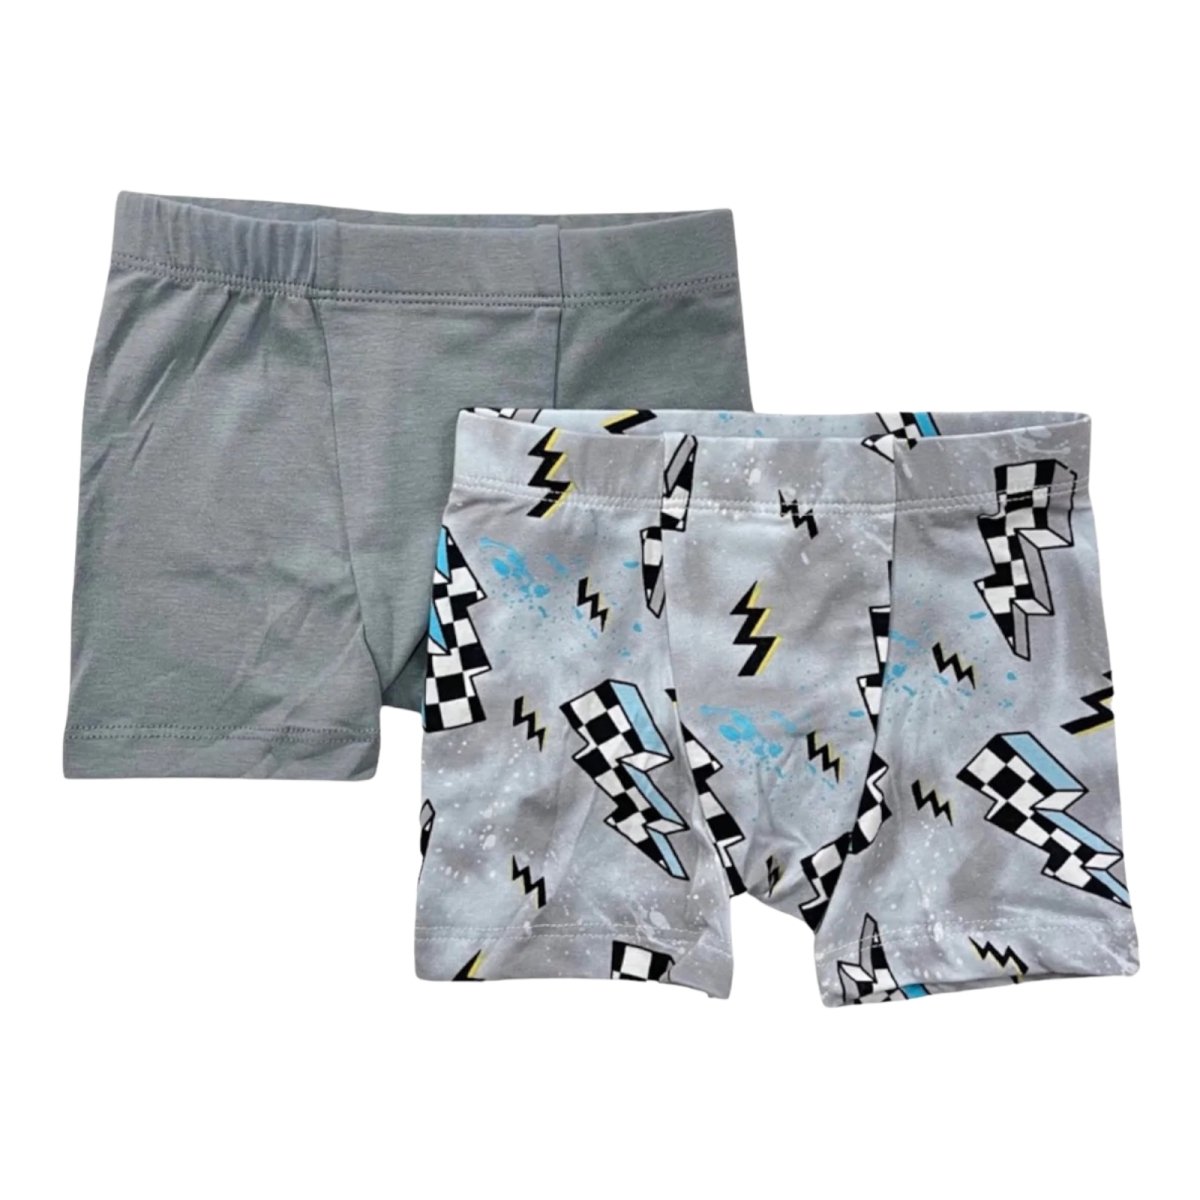 CHECKERED THUNDERBOLT 2 PACK BOXERS - BOXERS